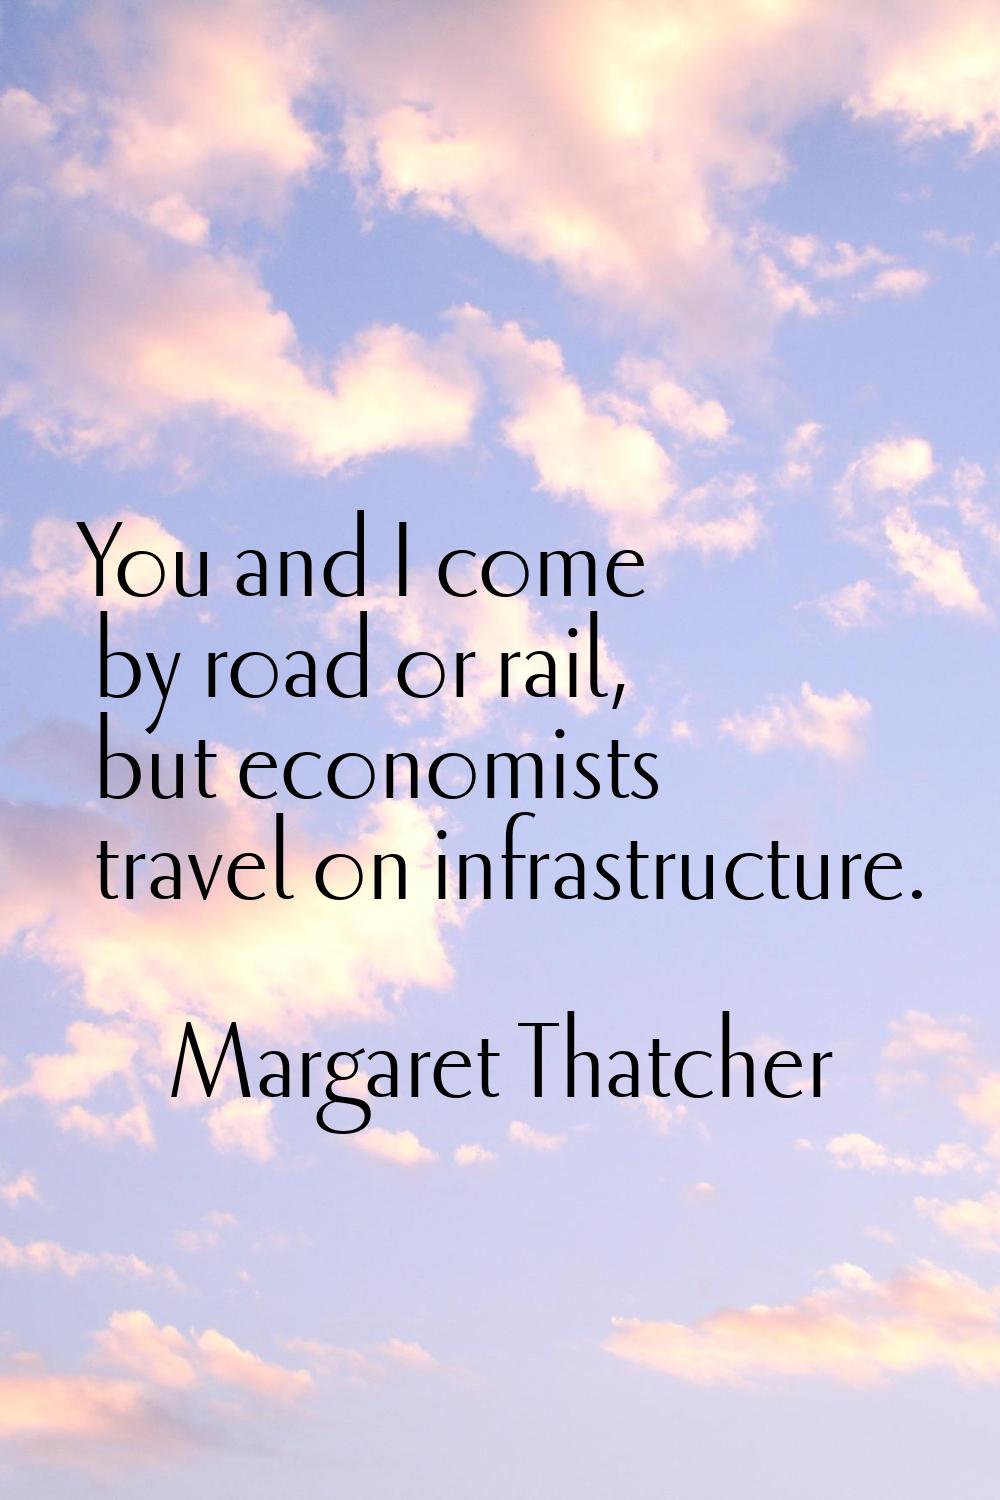 You and I come by road or rail, but economists travel on infrastructure.